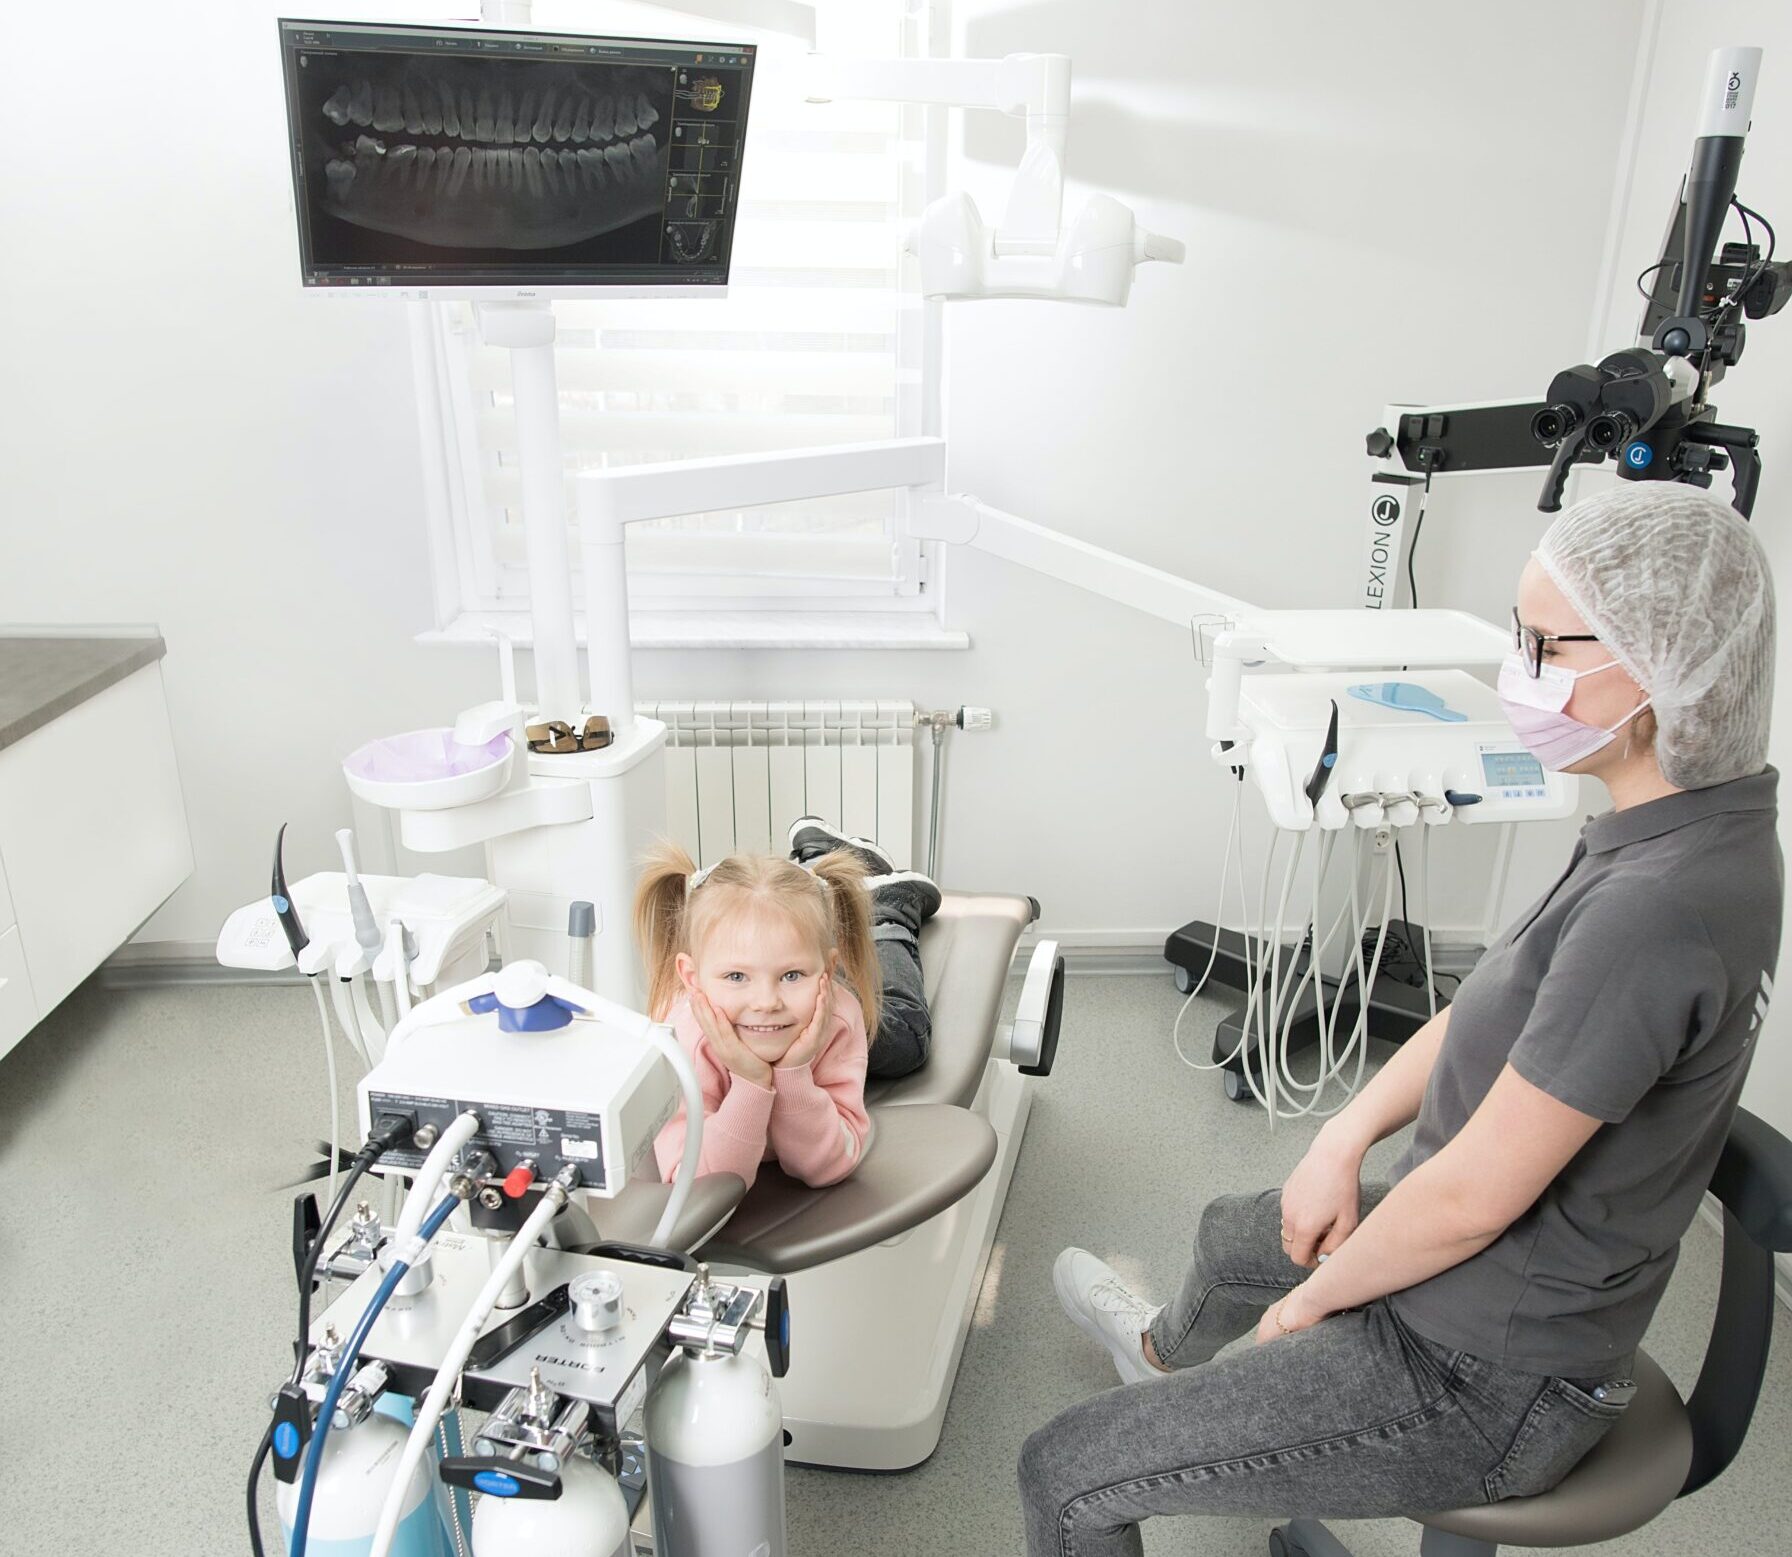 Smiling child sitting in dental chair with dentist